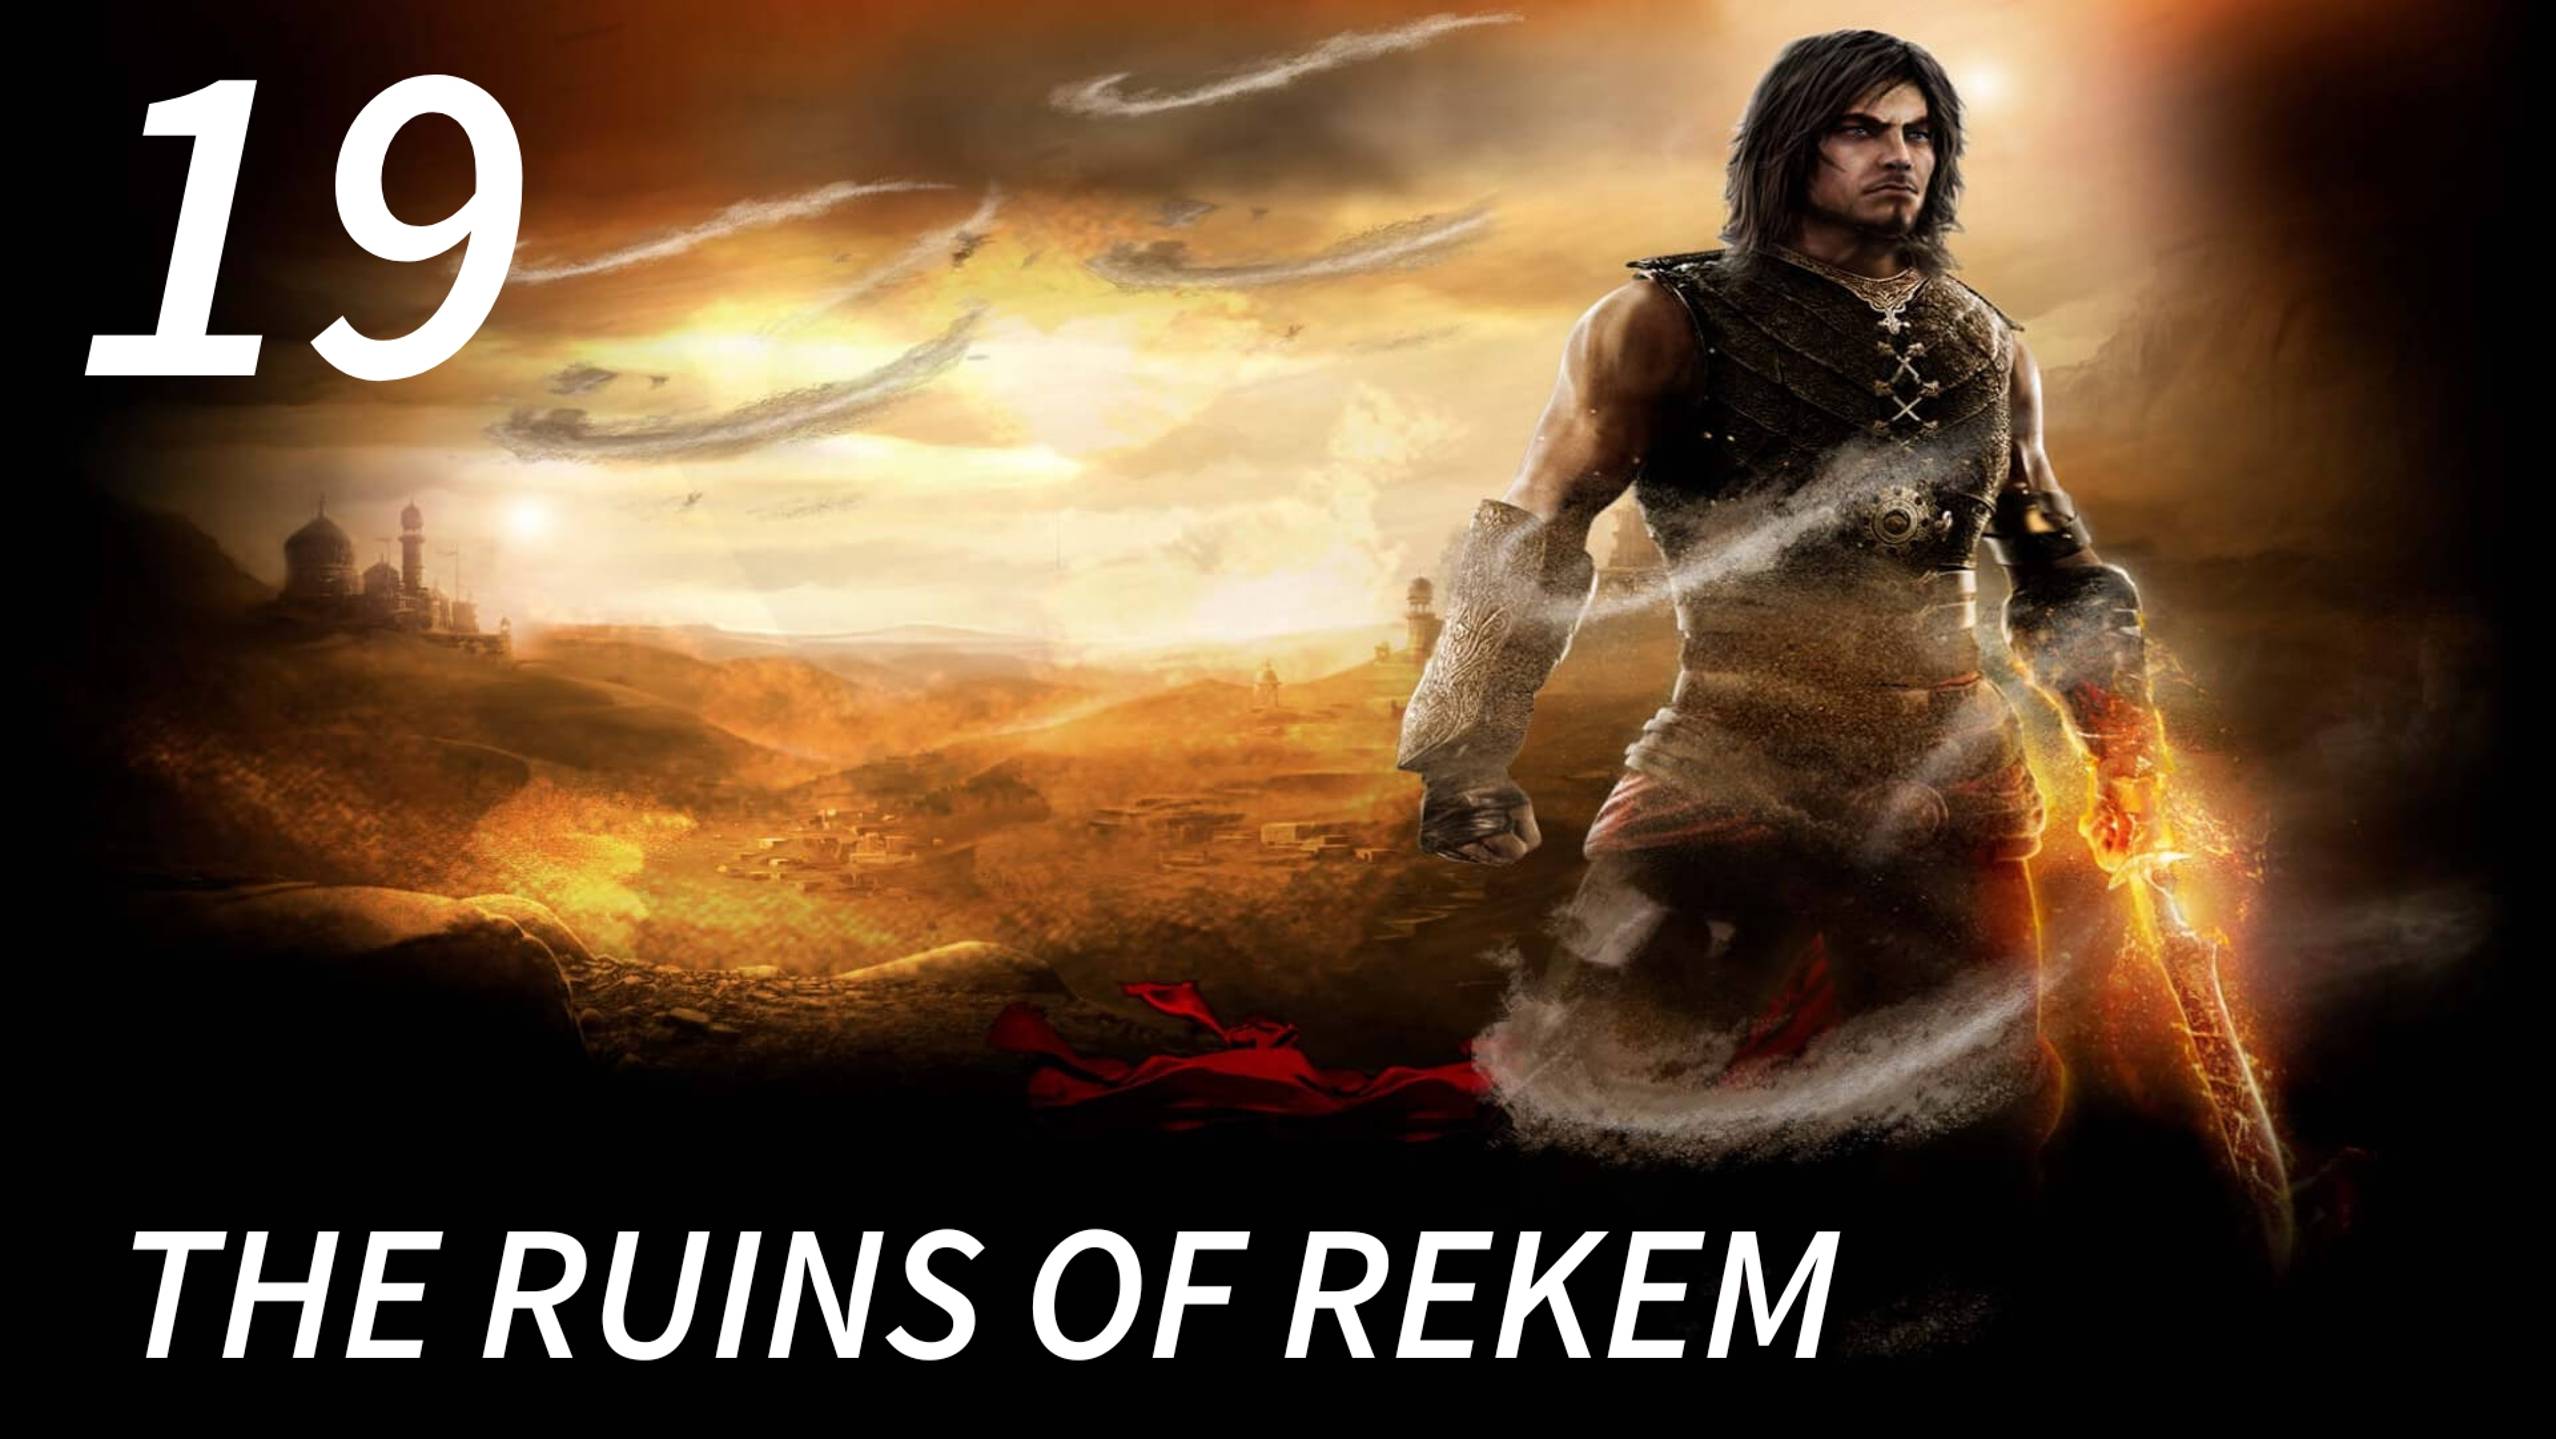 Prince of Persia: The Forgotten Sands / The Ruins of Rekem